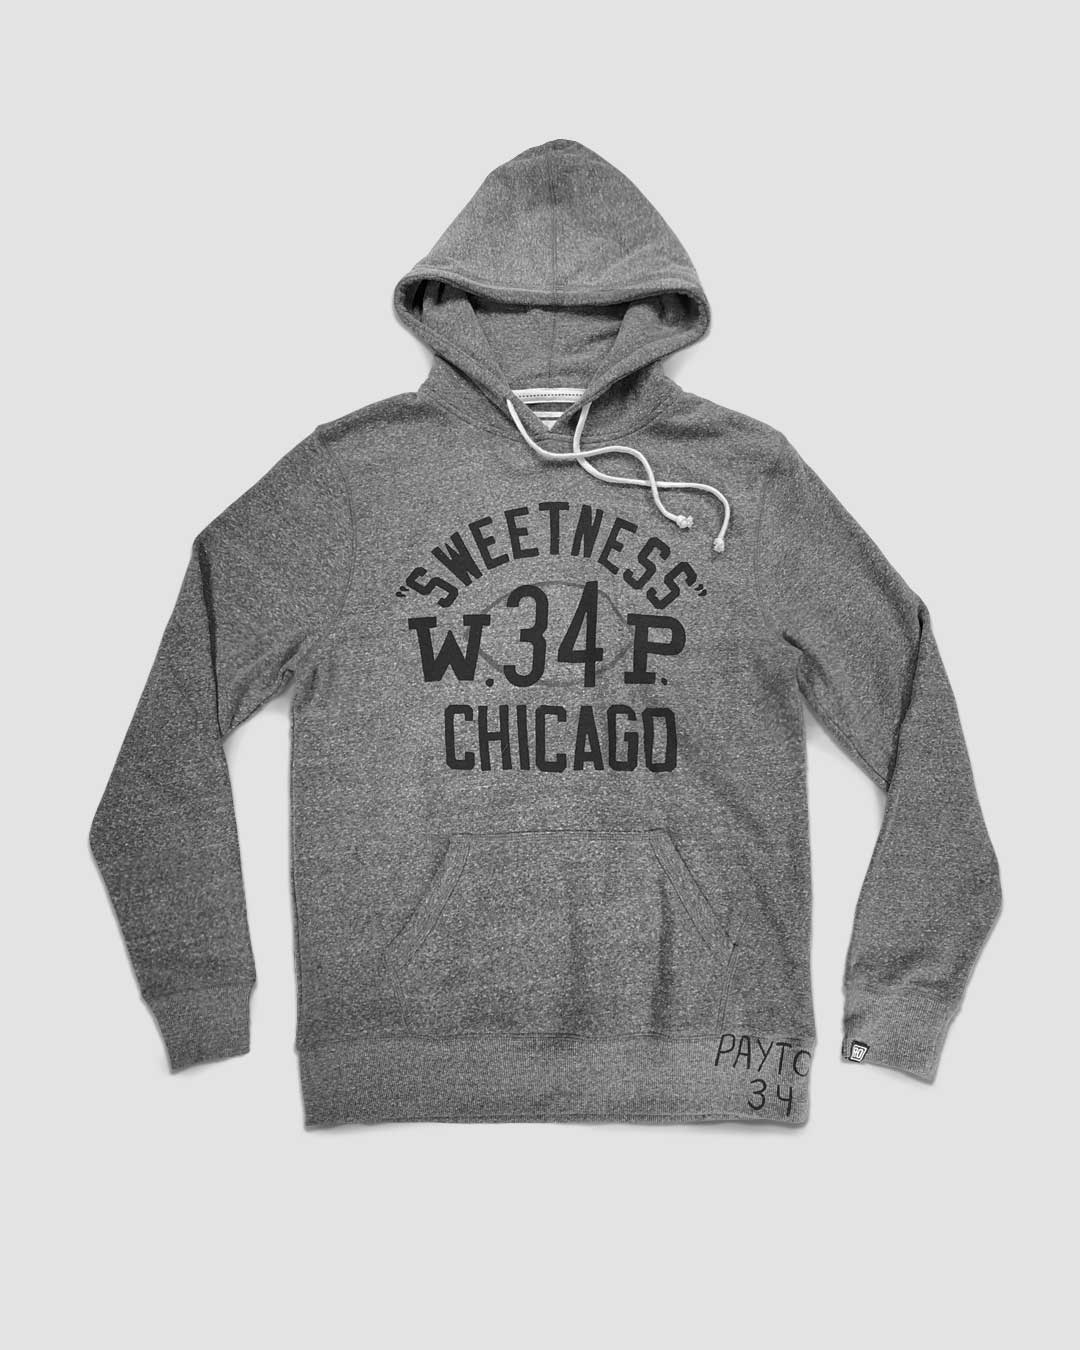 Stylish design SPORT AND ICON Walter Payton Sweetness #34 Pullover Hoody  from Roots of Fight Sales for Adult and Kids Family, Gift